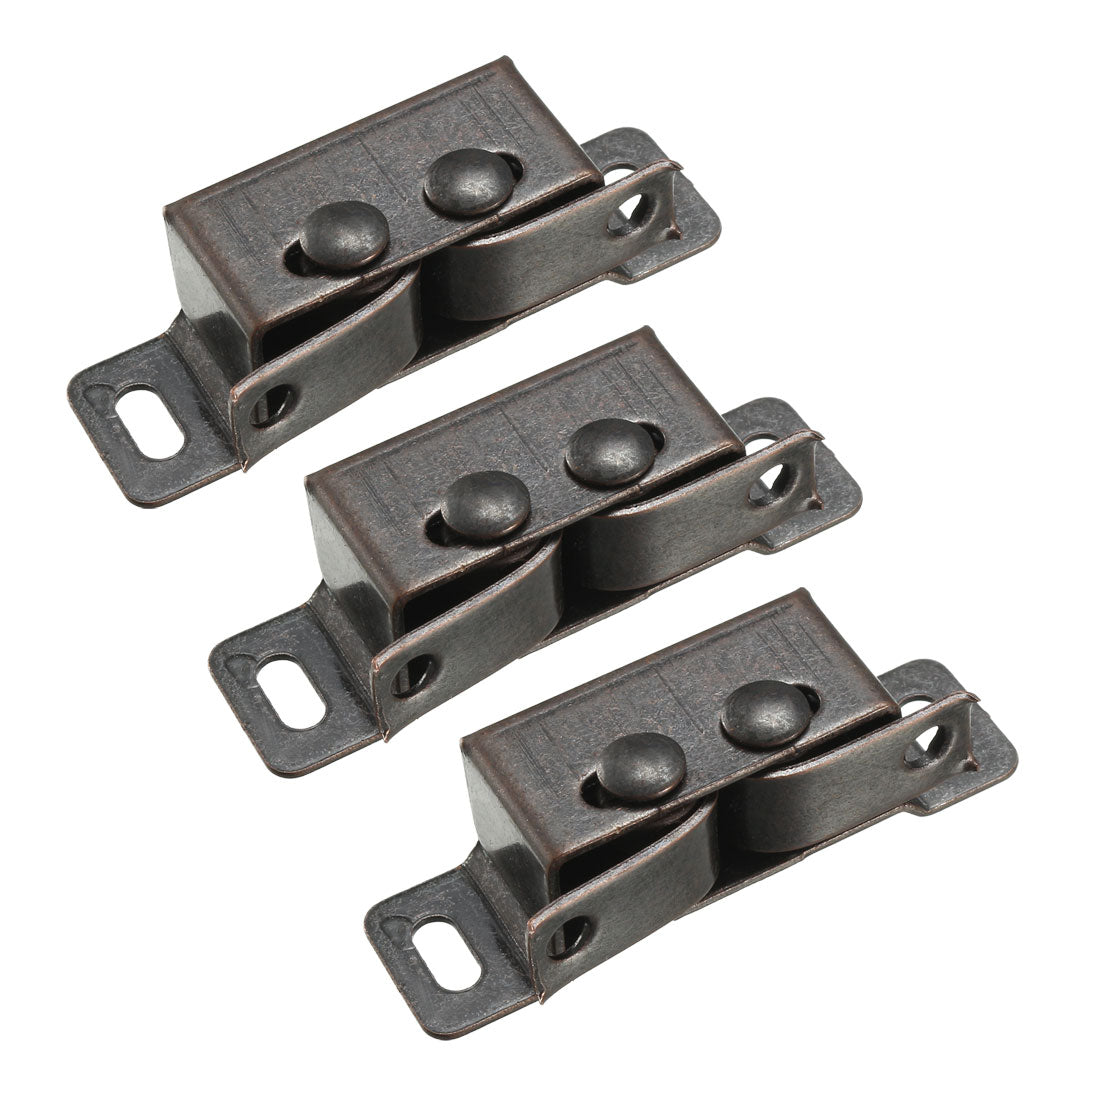 uxcell Uxcell Retro Wardrobe Door Iron Double Ball Roller Catch Latch, Copper Tone 3 Pcs